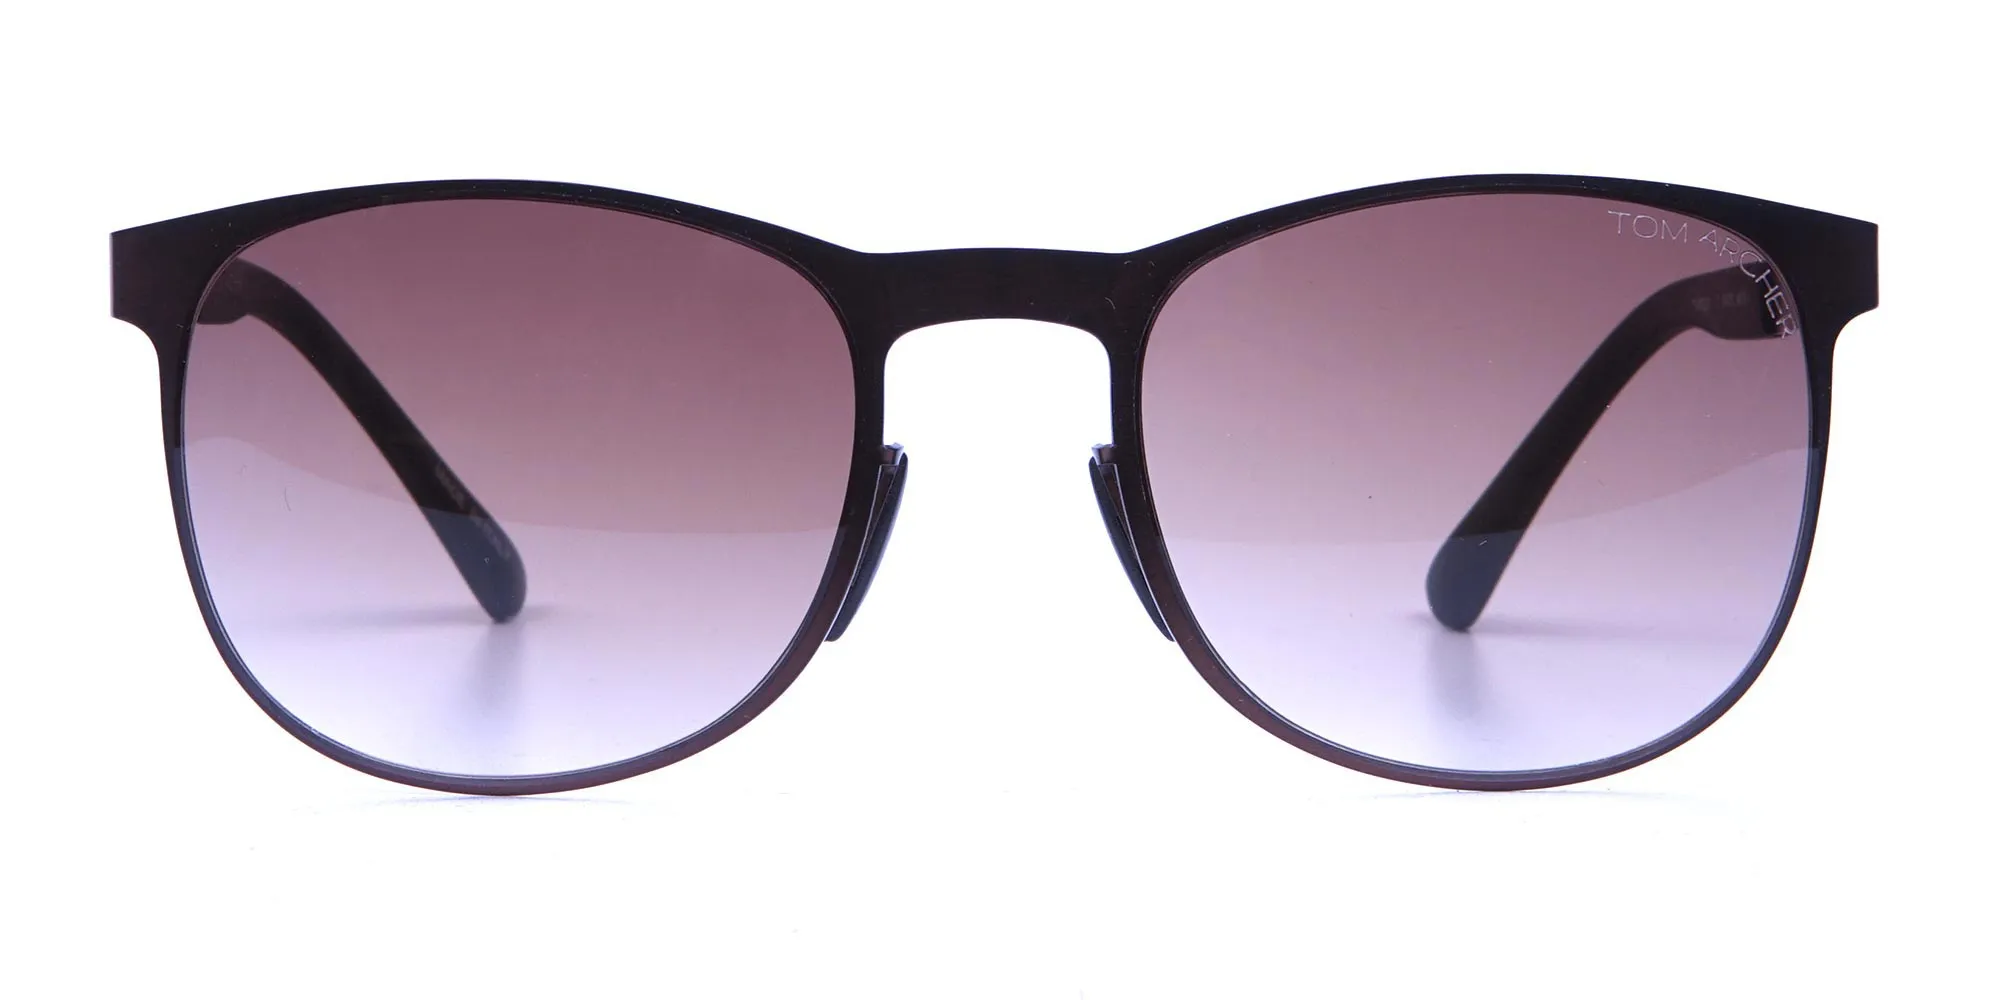 Brown and bronze sunglasses in Round Metal Frame-2